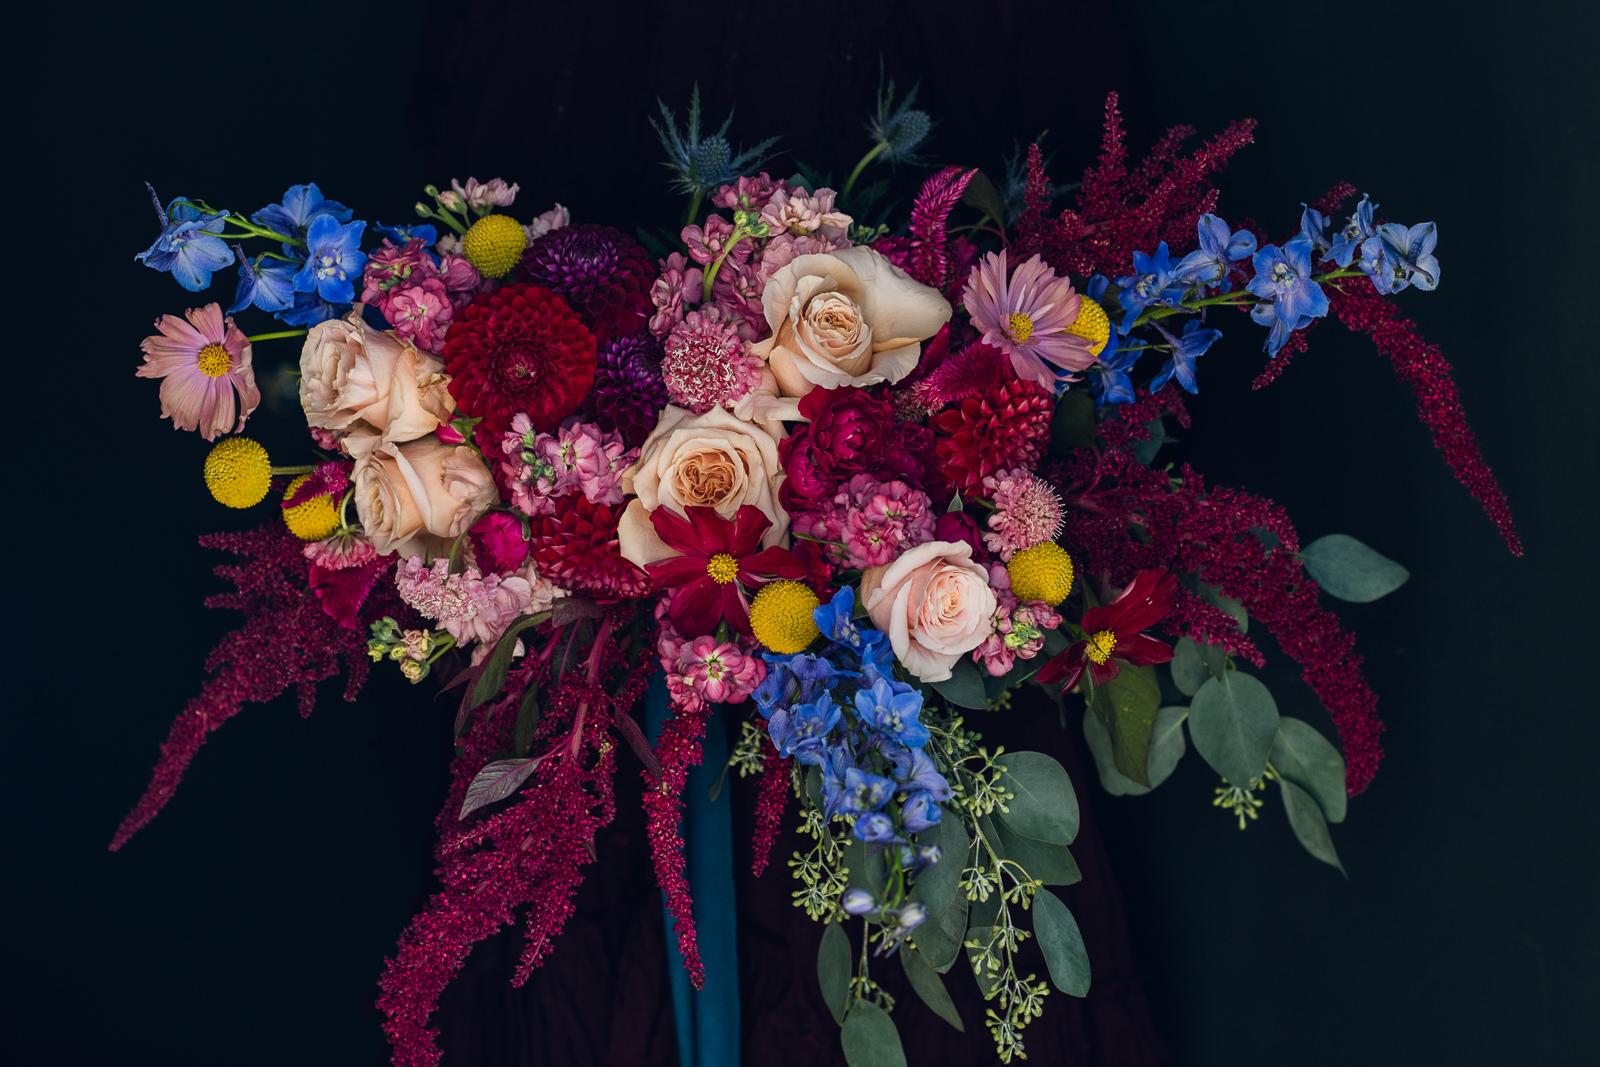 Silk and Willow ribbon tied around a vibrant jewel tone wedding bouquet